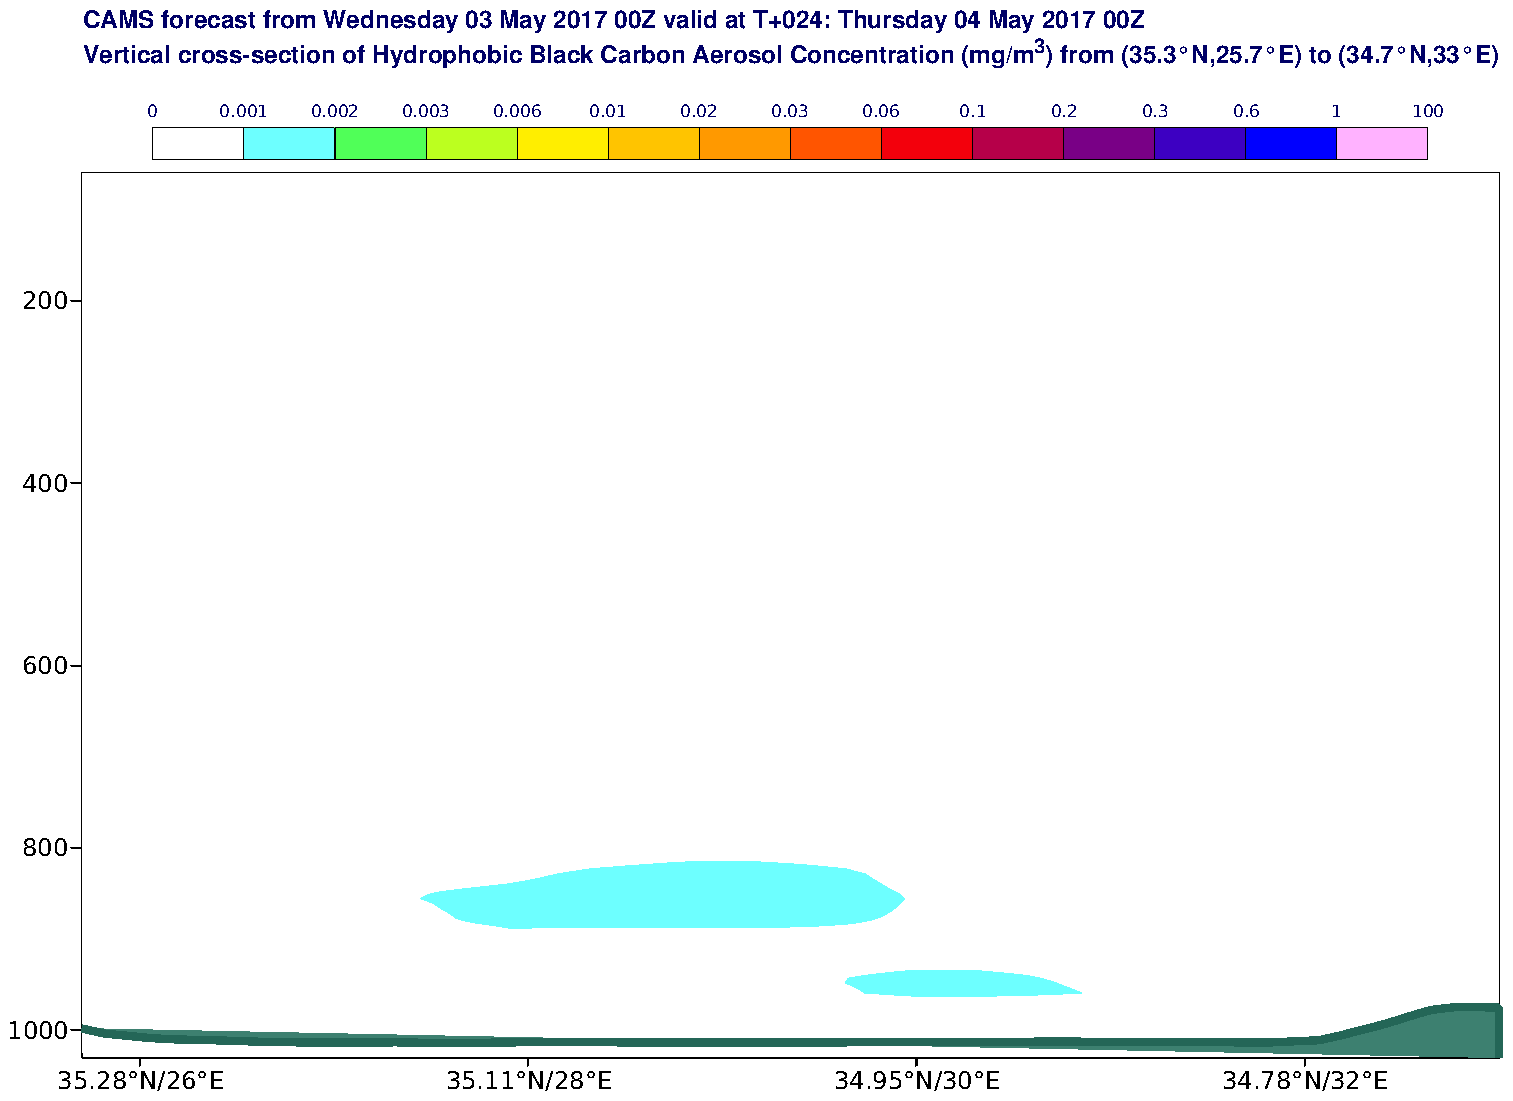 Vertical cross-section of Hydrophobic Black Carbon Aerosol Concentration (mg/m3) valid at T24 - 2017-05-04 00:00